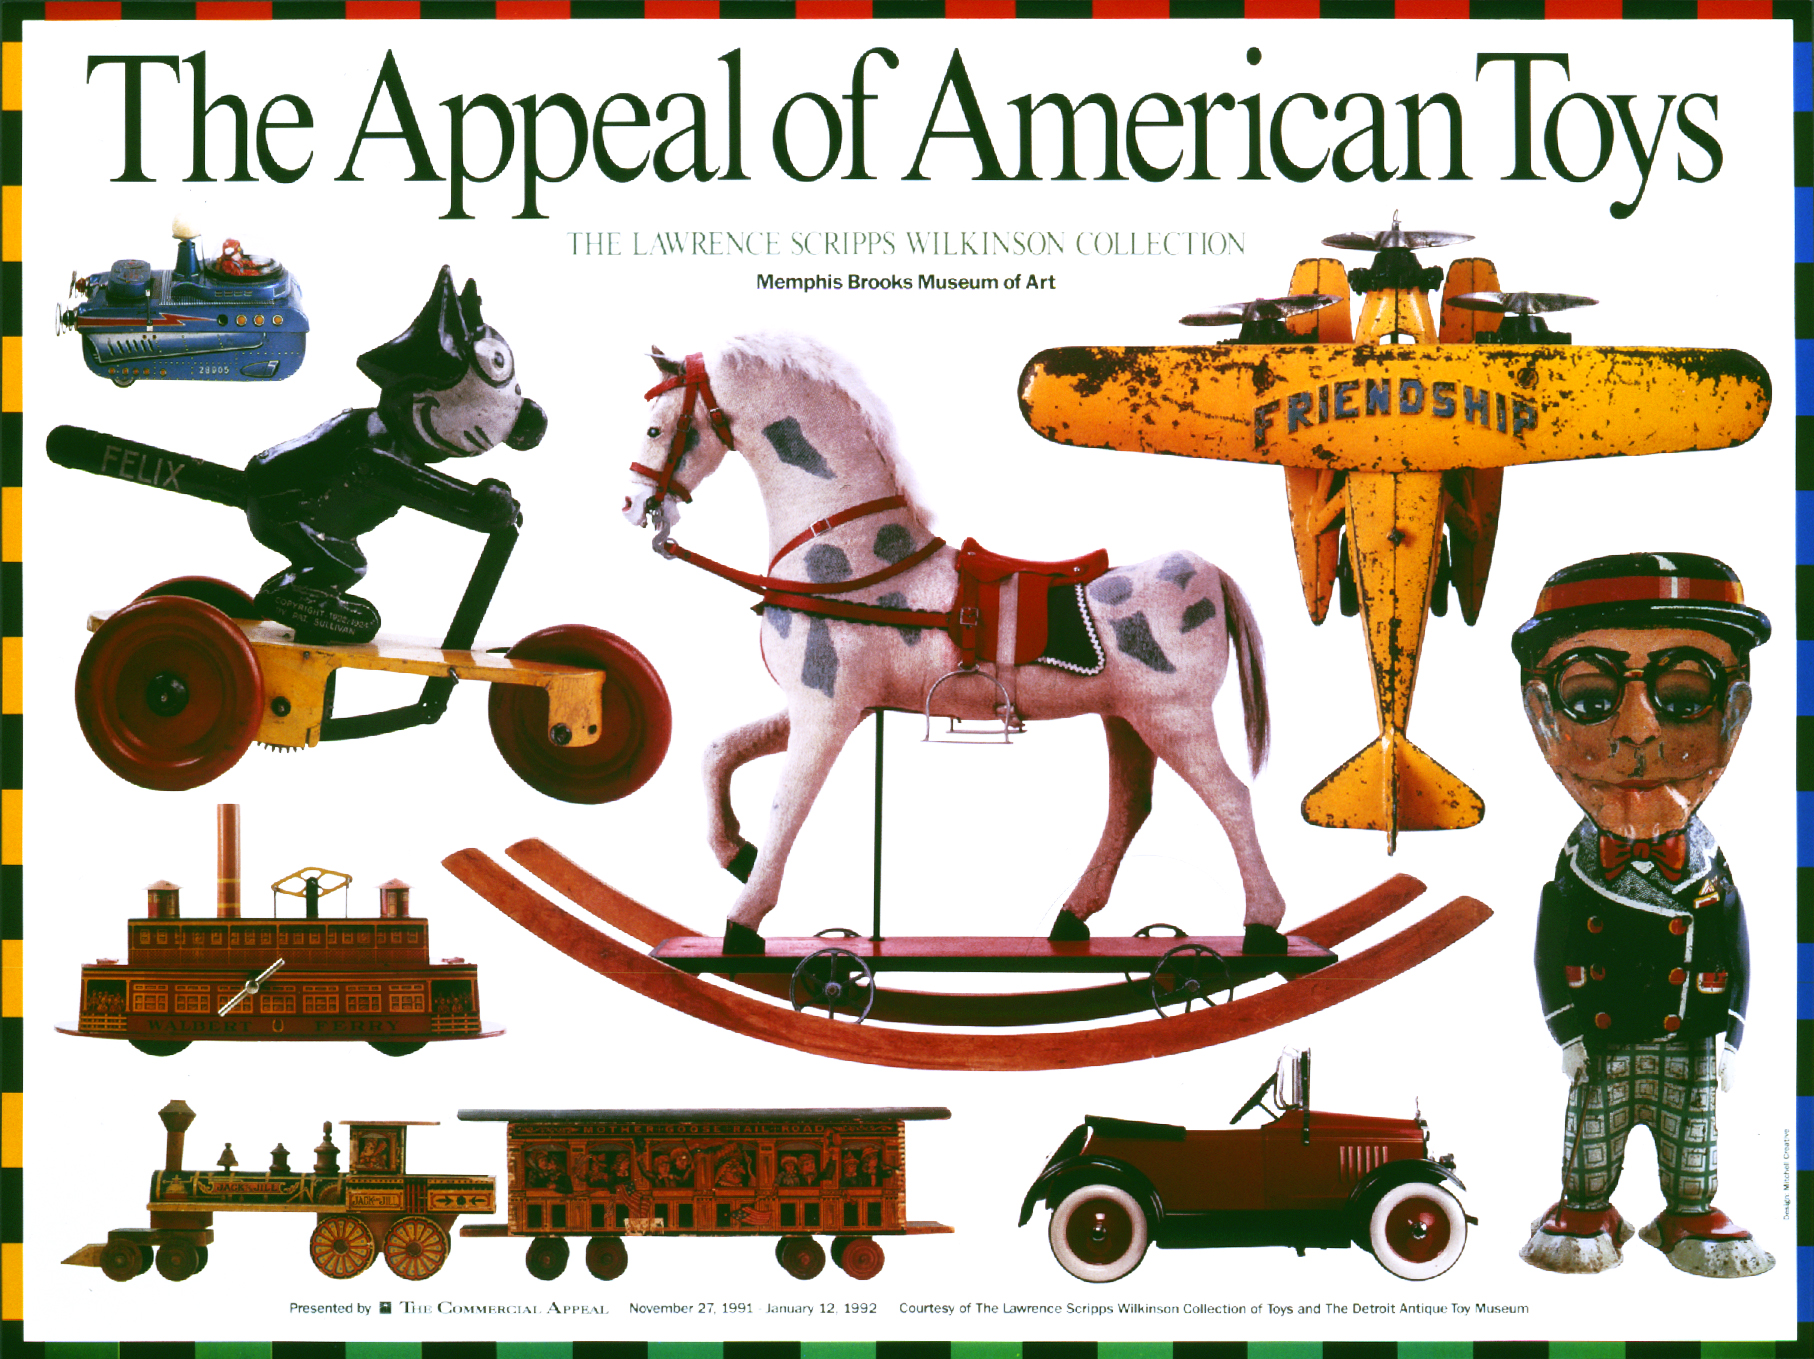  The Appeal of American Toys exhibit poster  Design and creative by Chuck Mitchell 